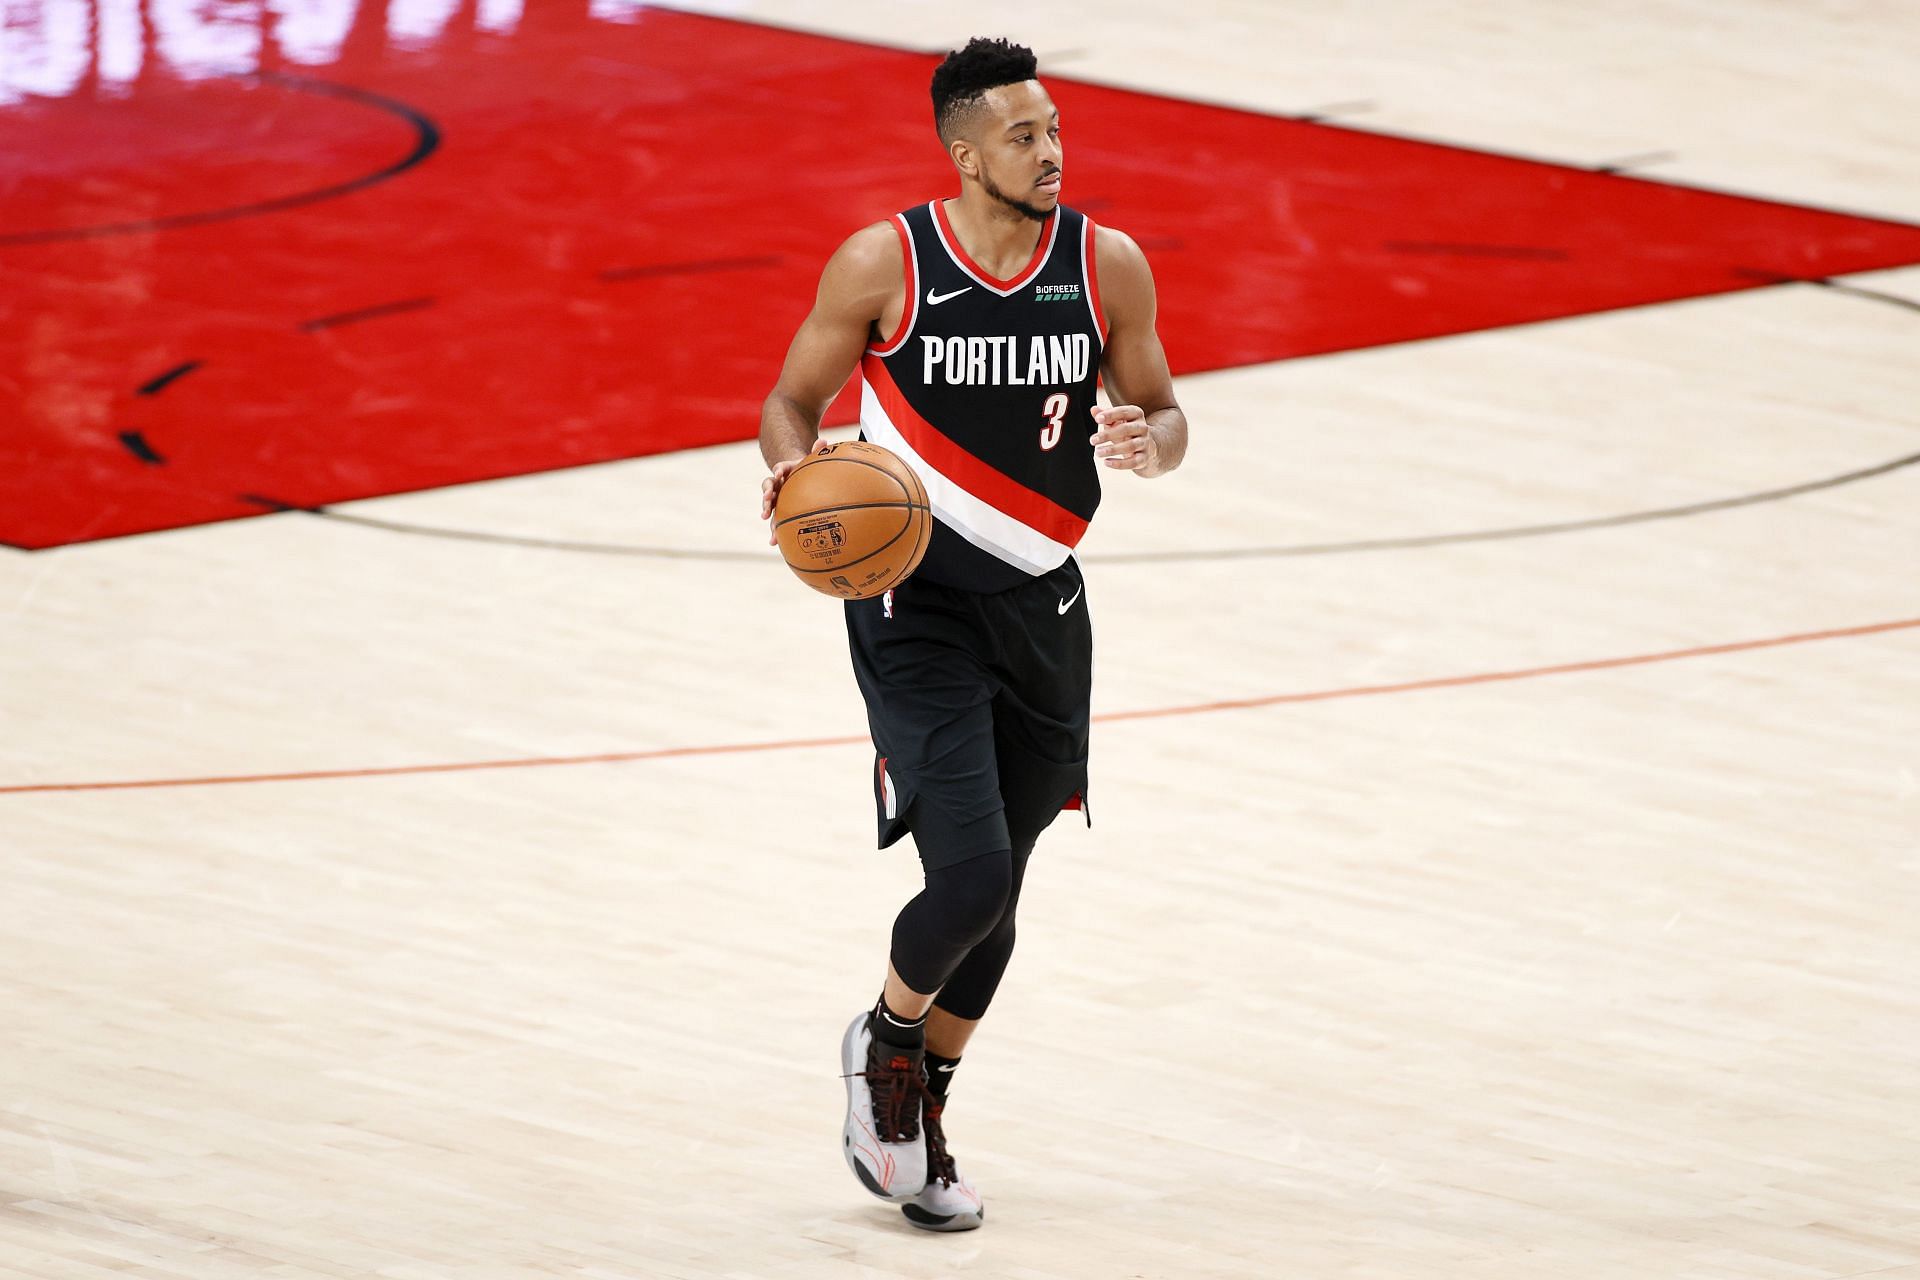 CJ McCollum #3 of the Portland Trail Blazers dribbles against the Denver Nuggets during Round 1, Game 4 of the 2021 NBA Playoffs at Moda Center on May 29, 2021 in Portland, Oregon.